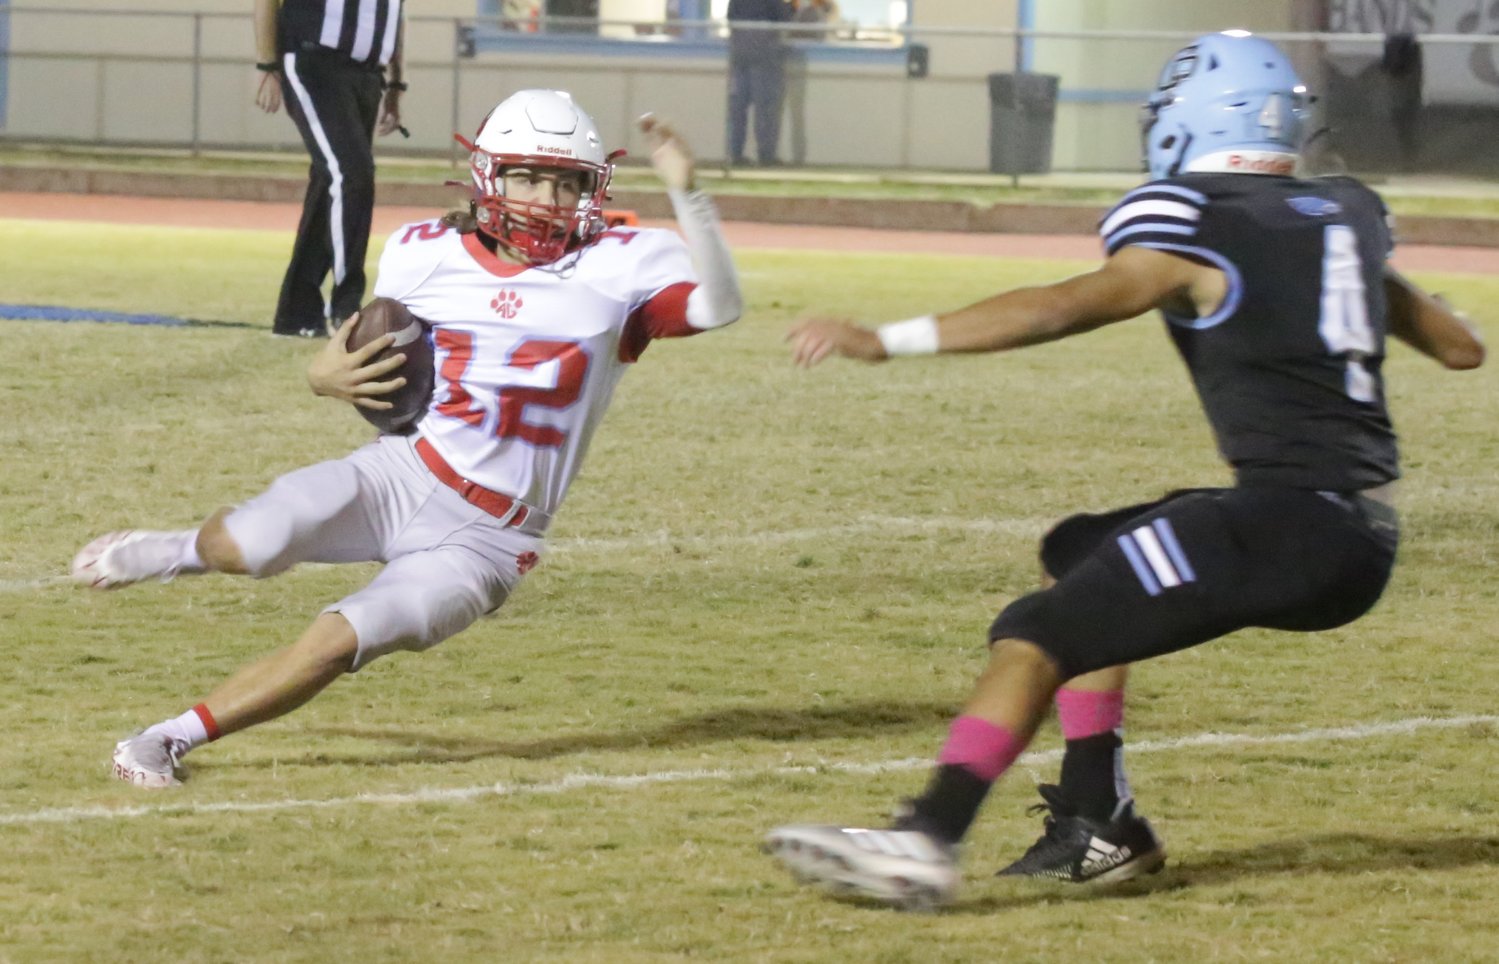 Alba-Golden’s Luke Sutton cuts back inside a defender after taking a pass from quarterback Easton Campbell.